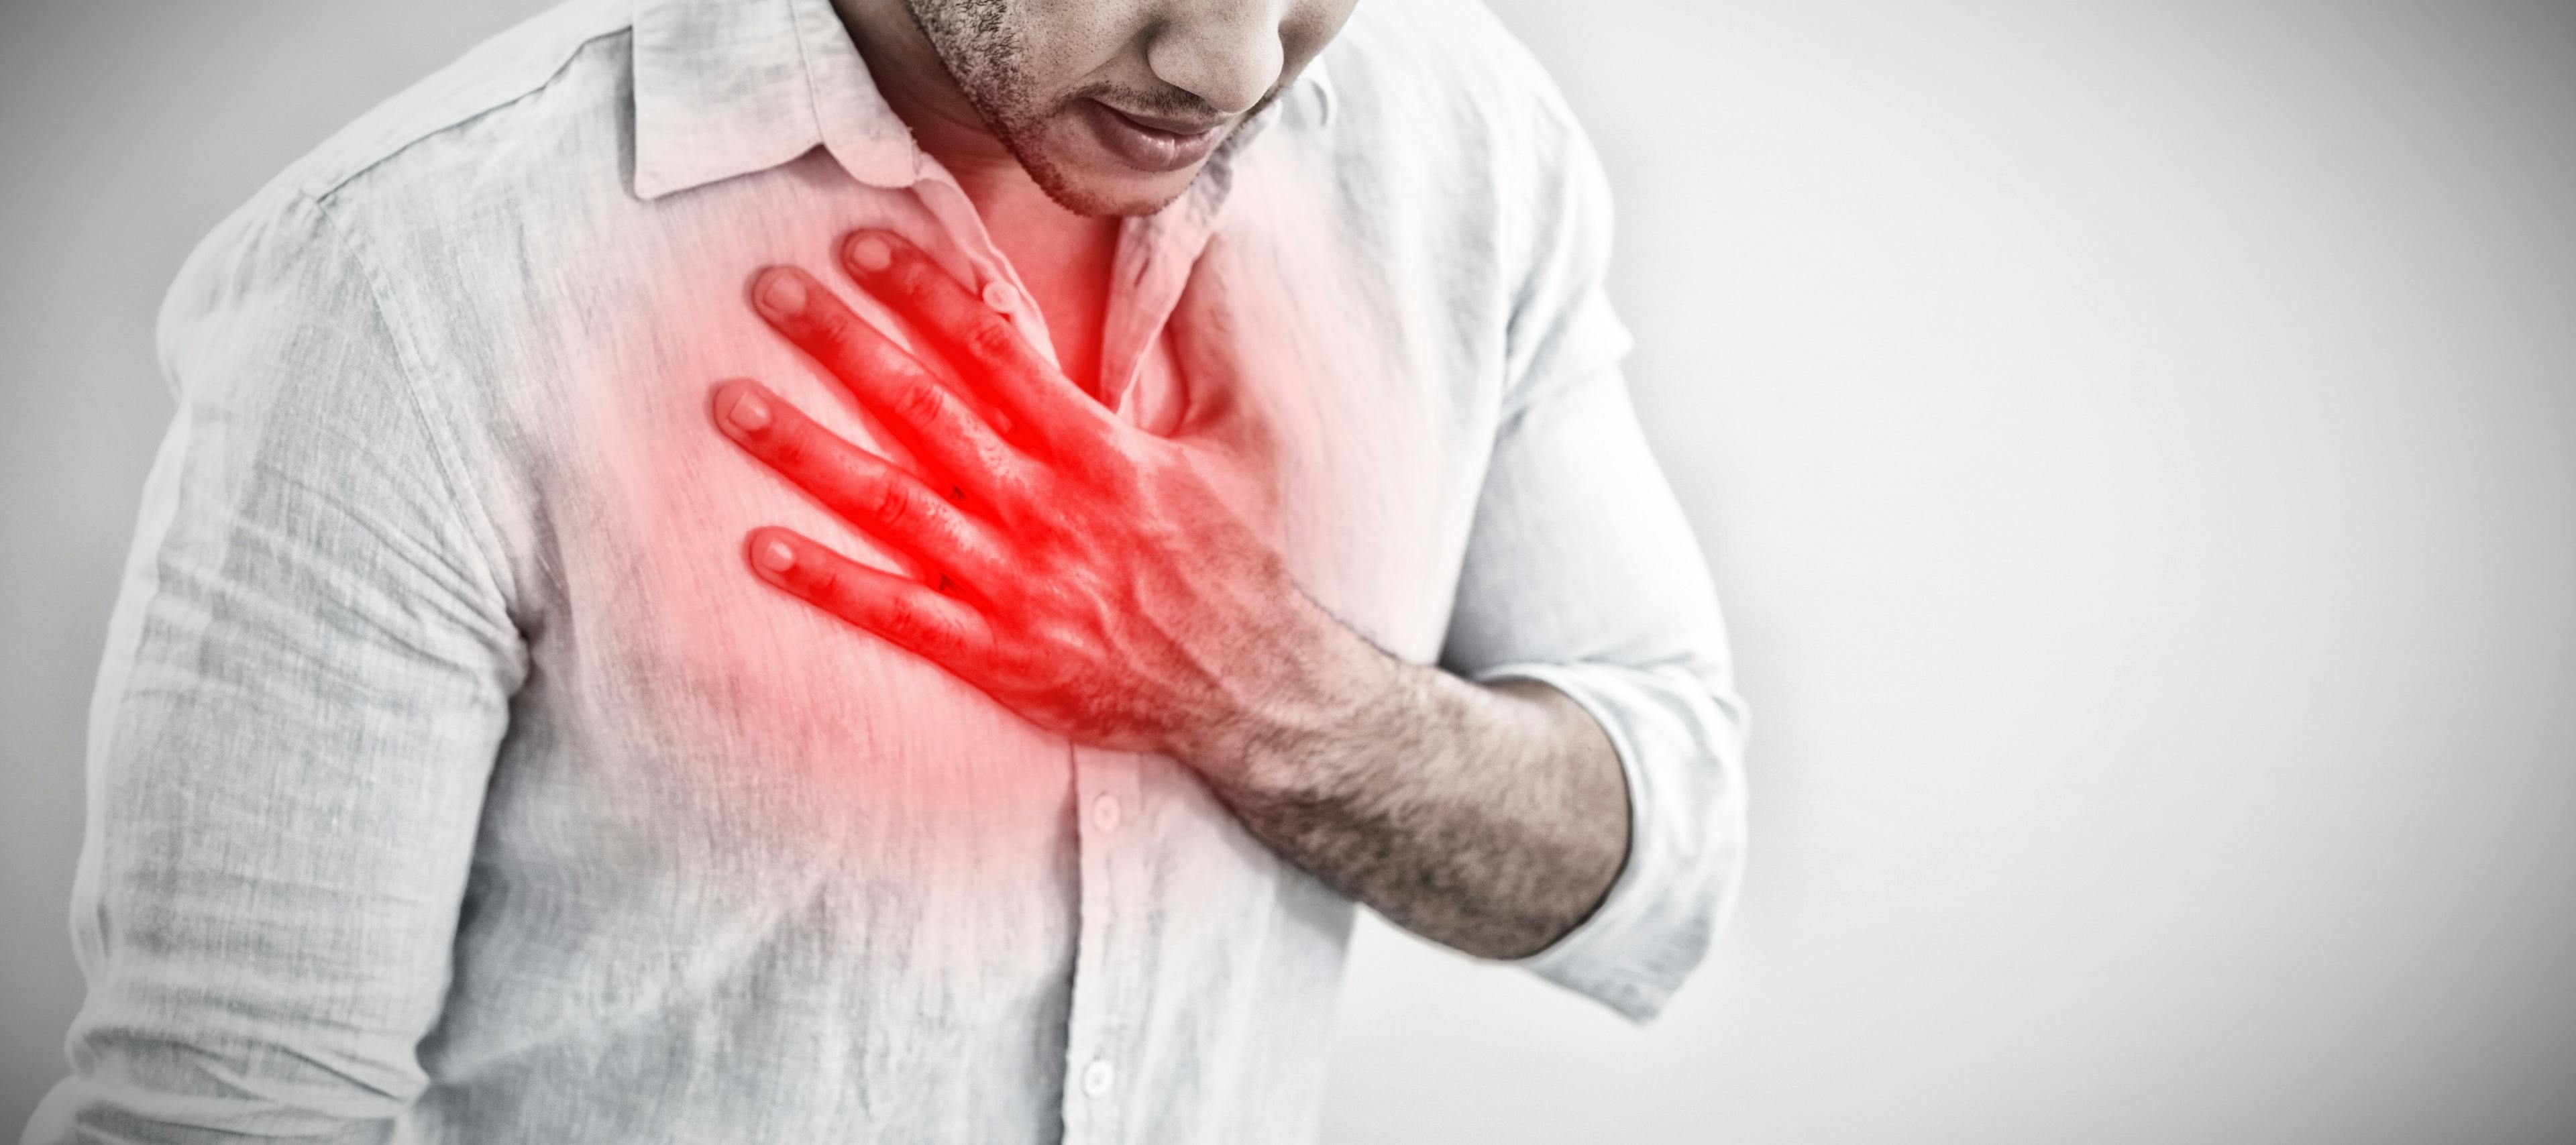 More than 20% of CAD Patients Report Monthly Episodes of Angina